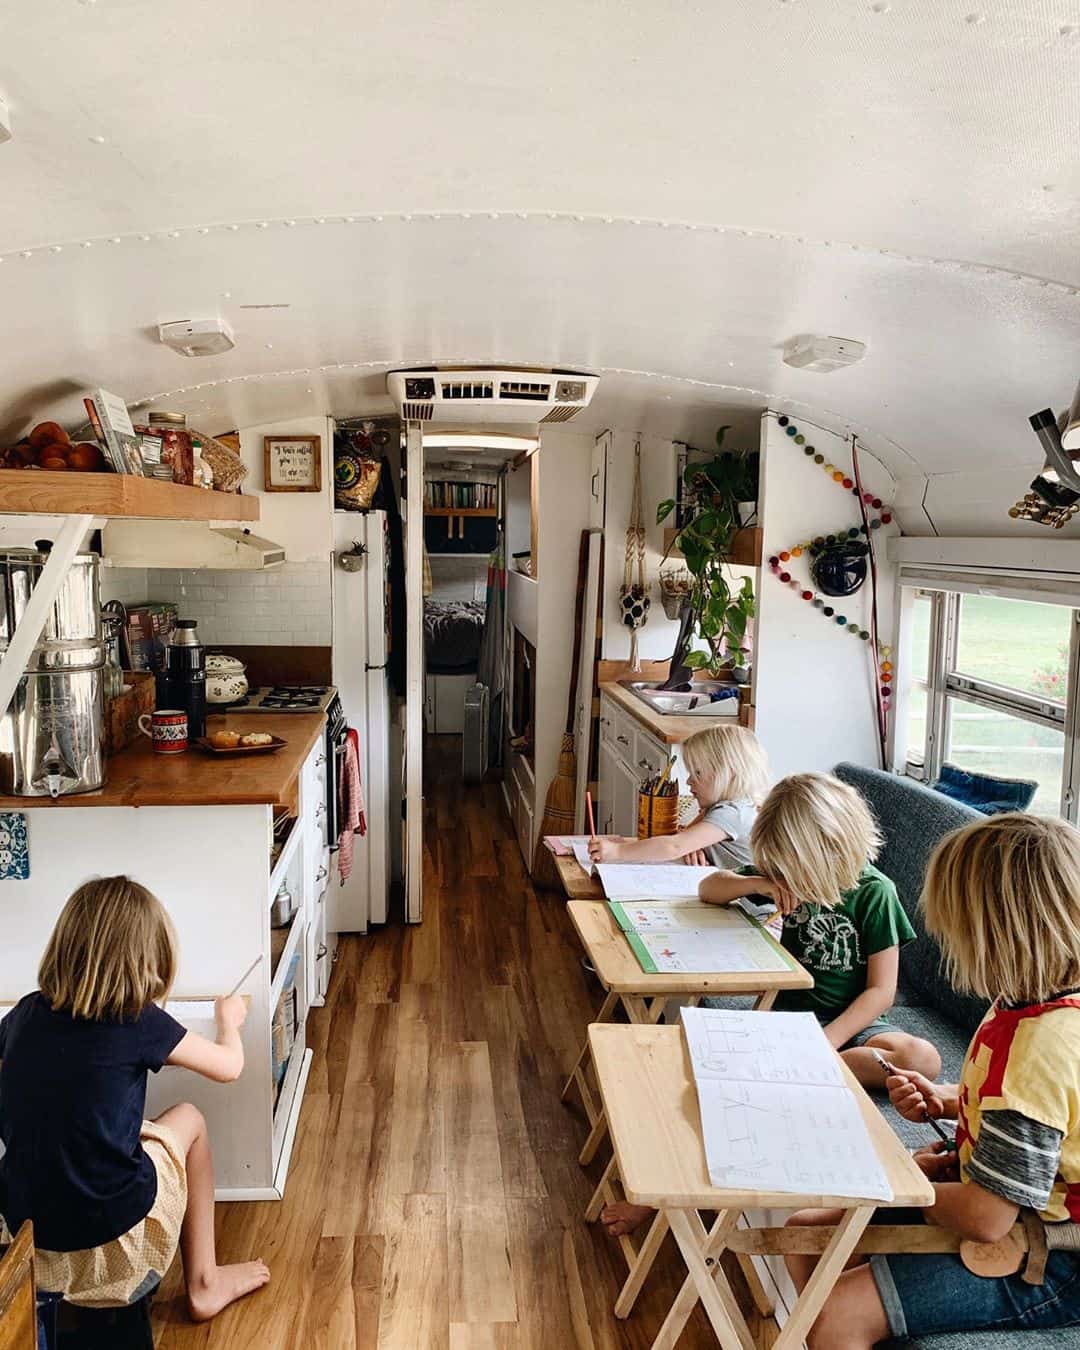 Photograph of a family of four home-educated children sitting at their desks inside a converted schoolbus